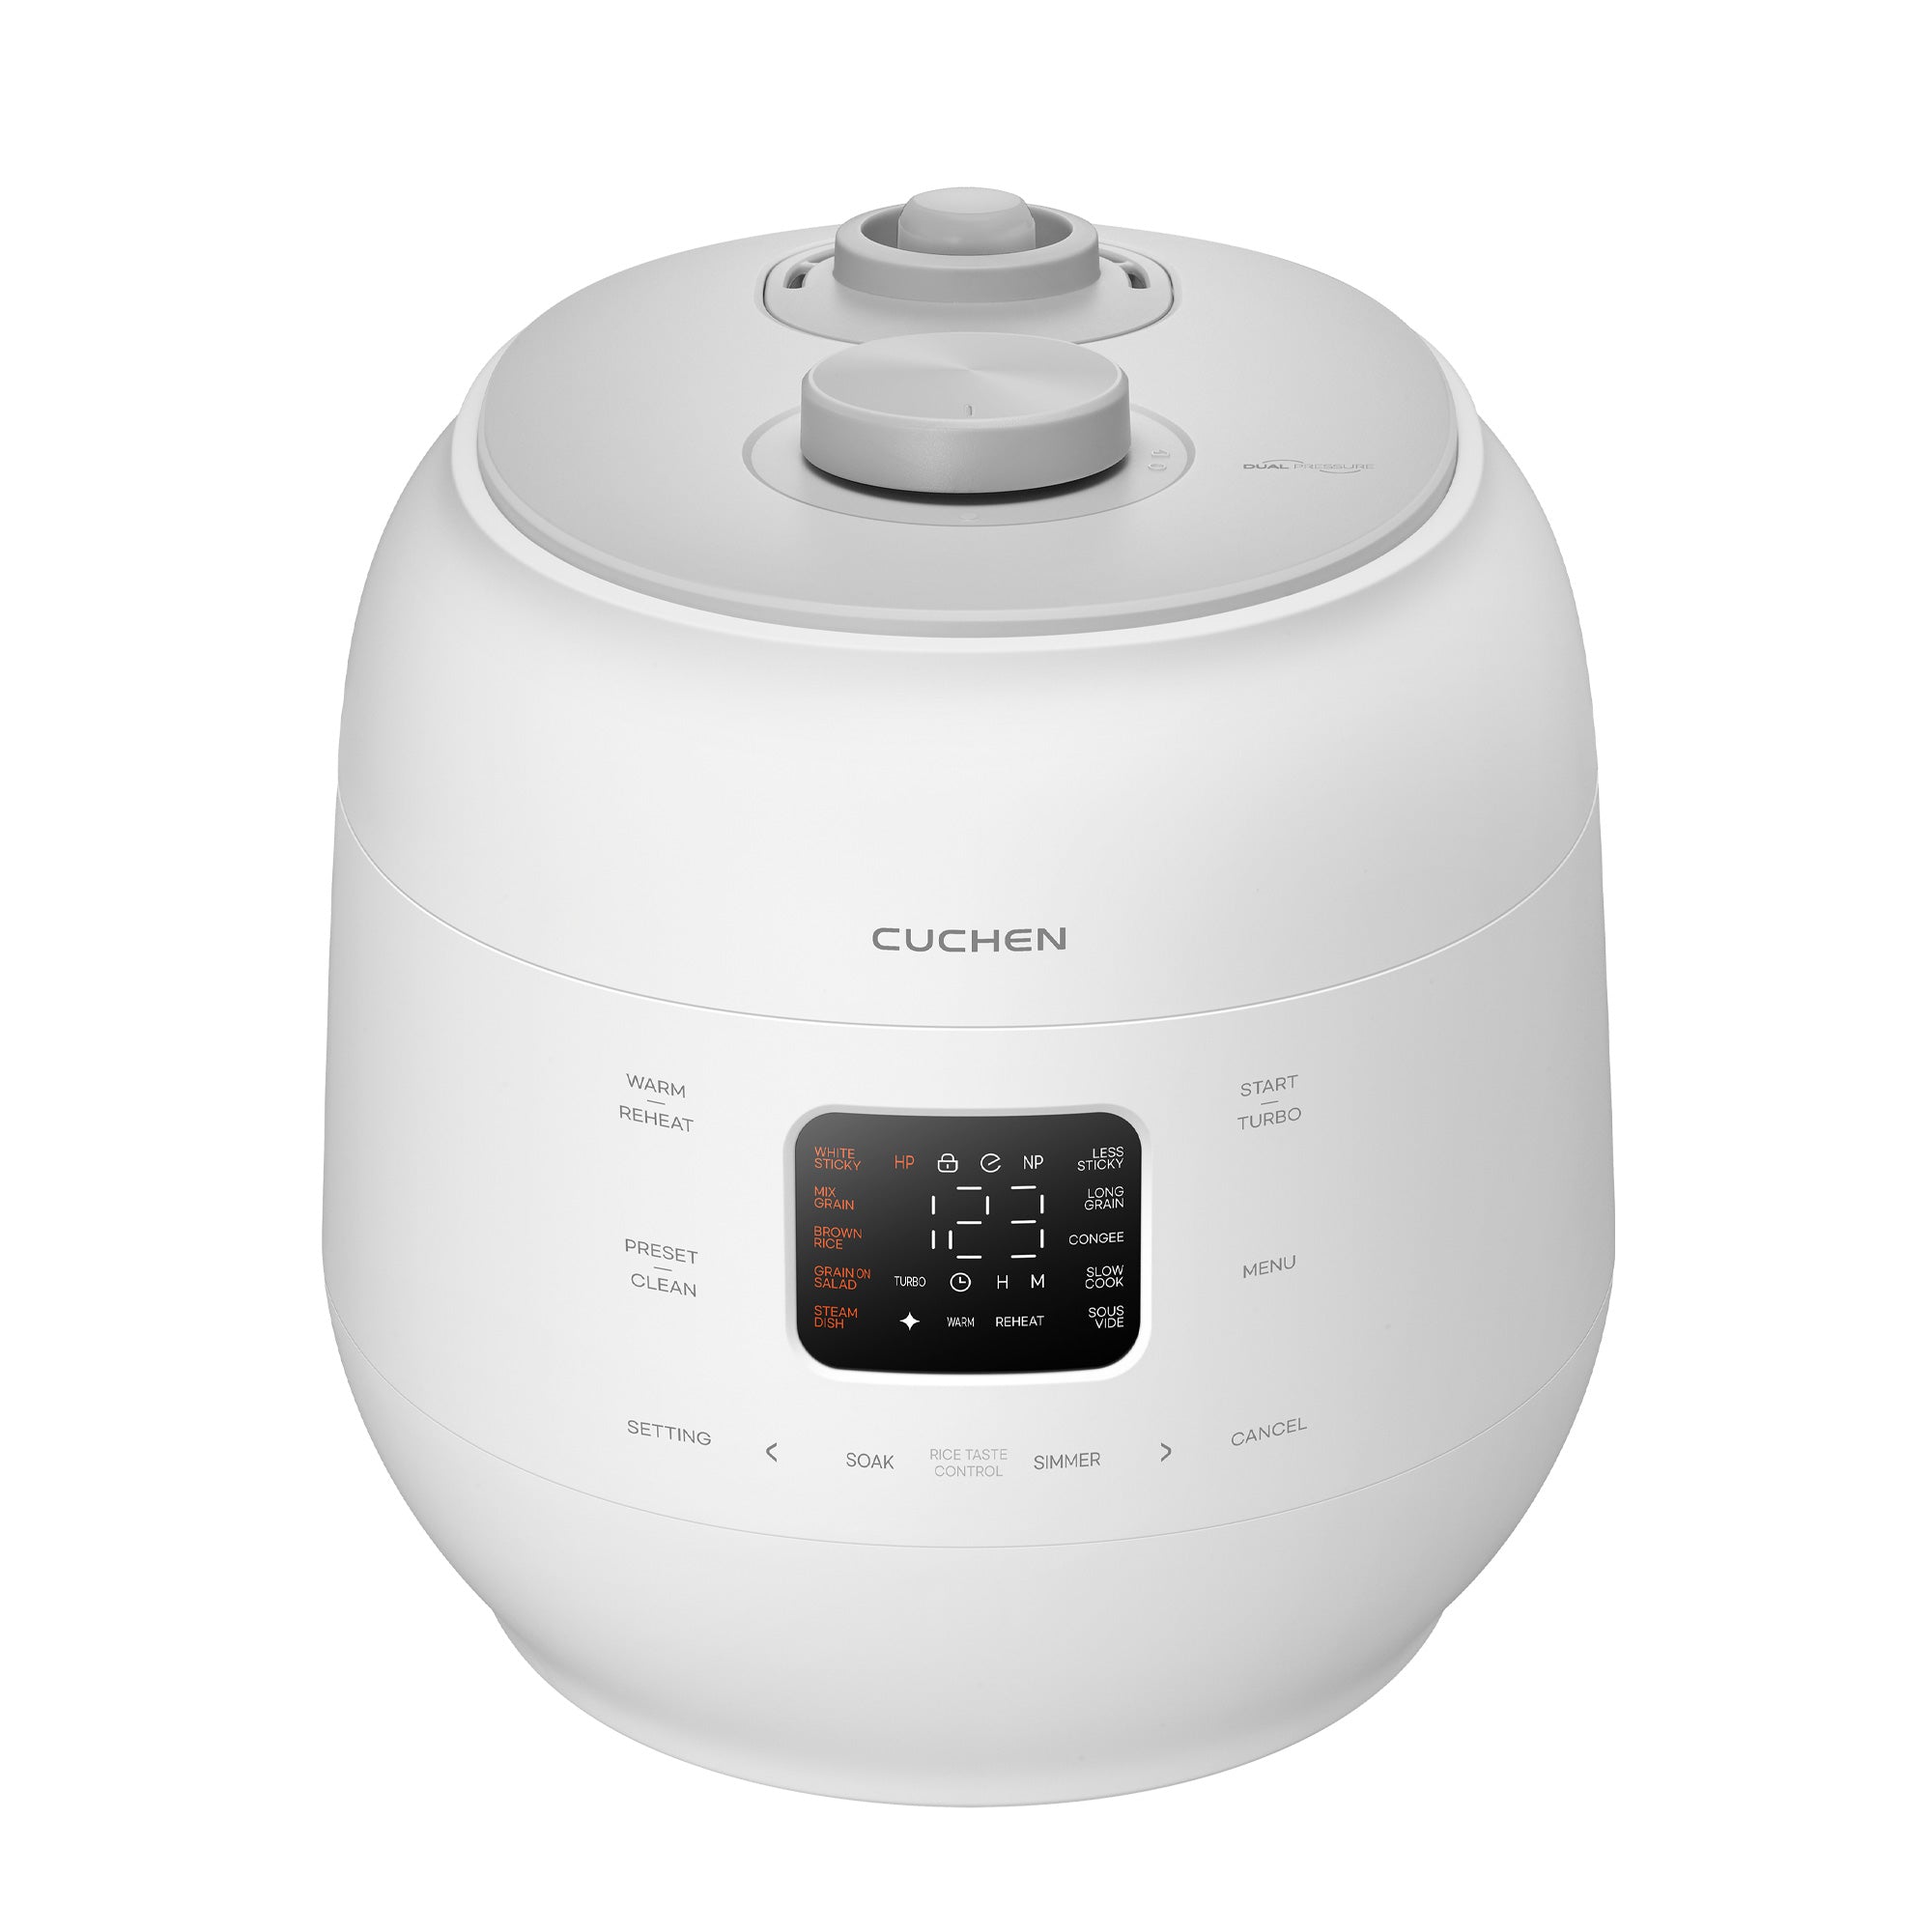 Continental 6-Cup (Cooked) Rice Cooker White, 6-Cup - Fry's Food